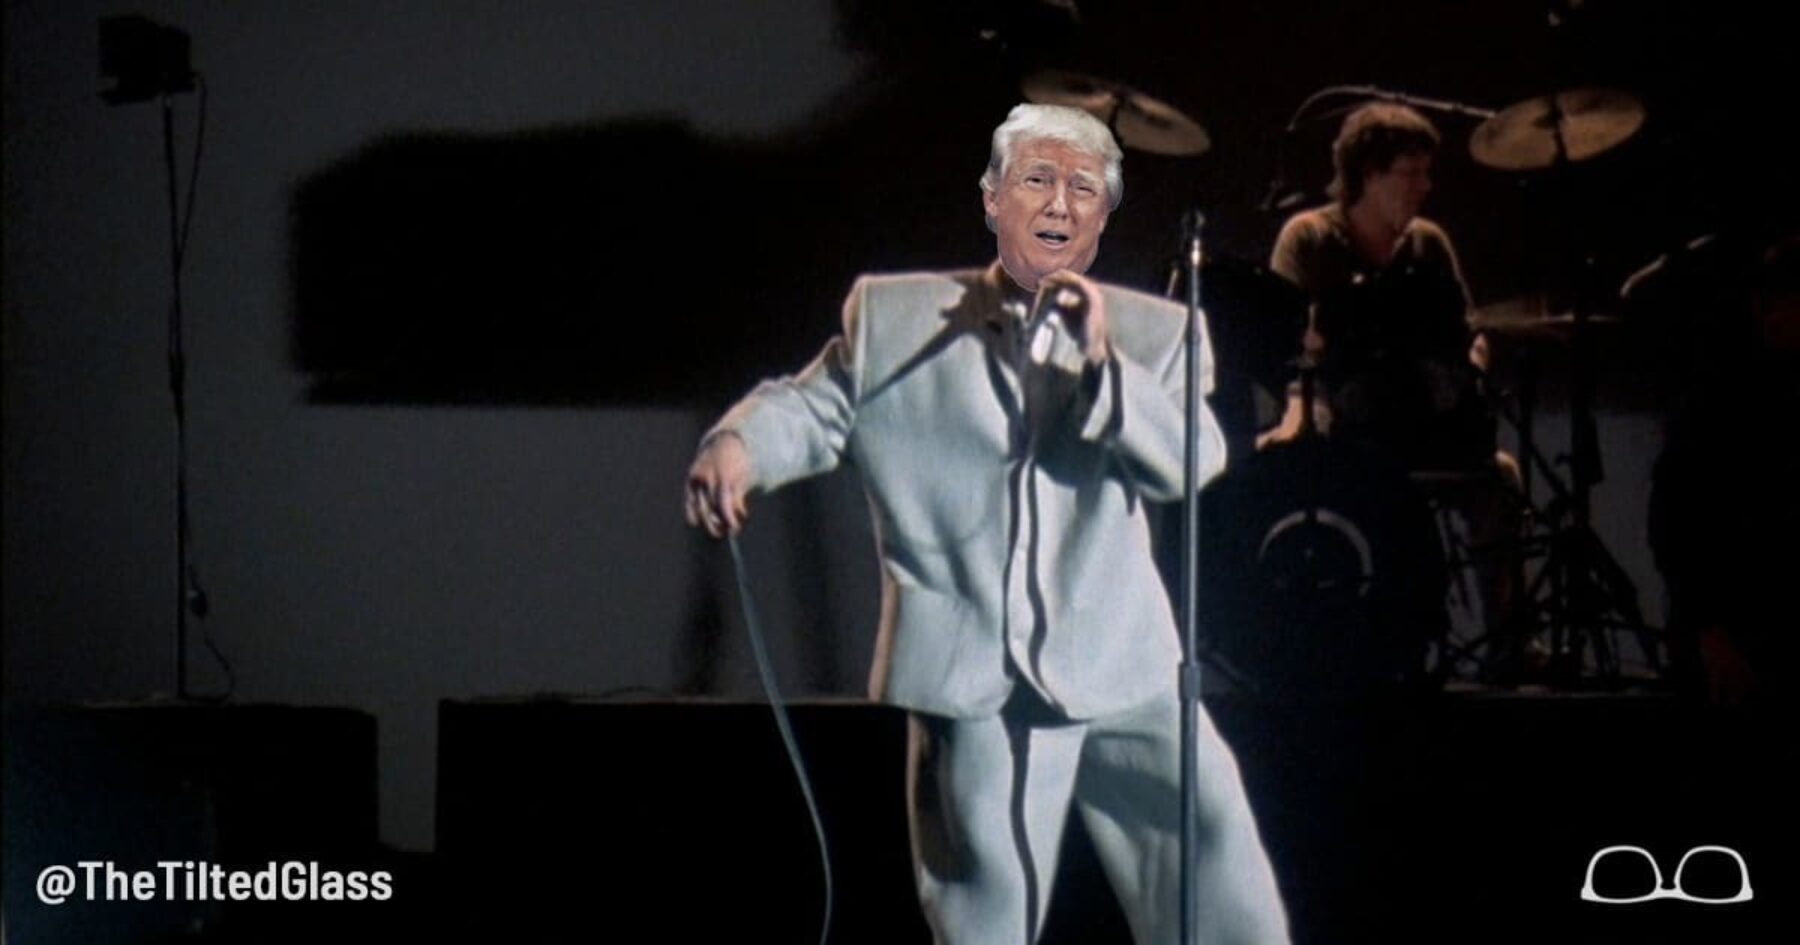 Trump Reveals Mystery of His Big Suit